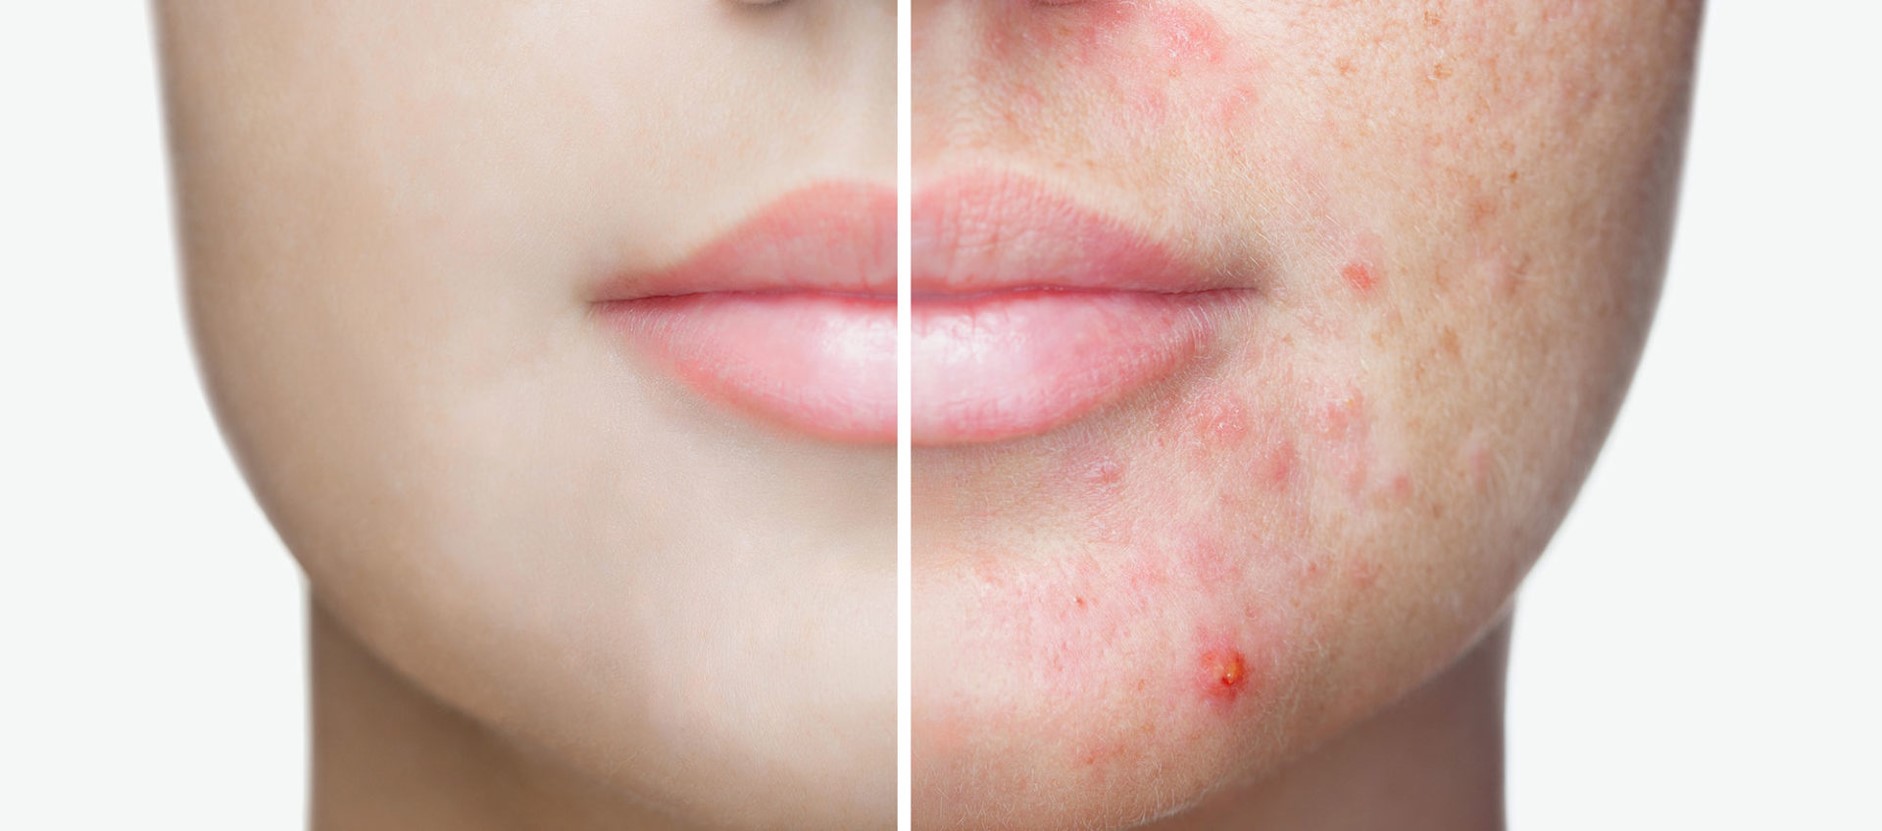 3-does vitamin C help acne-Improve the Appearance of Acne Scars